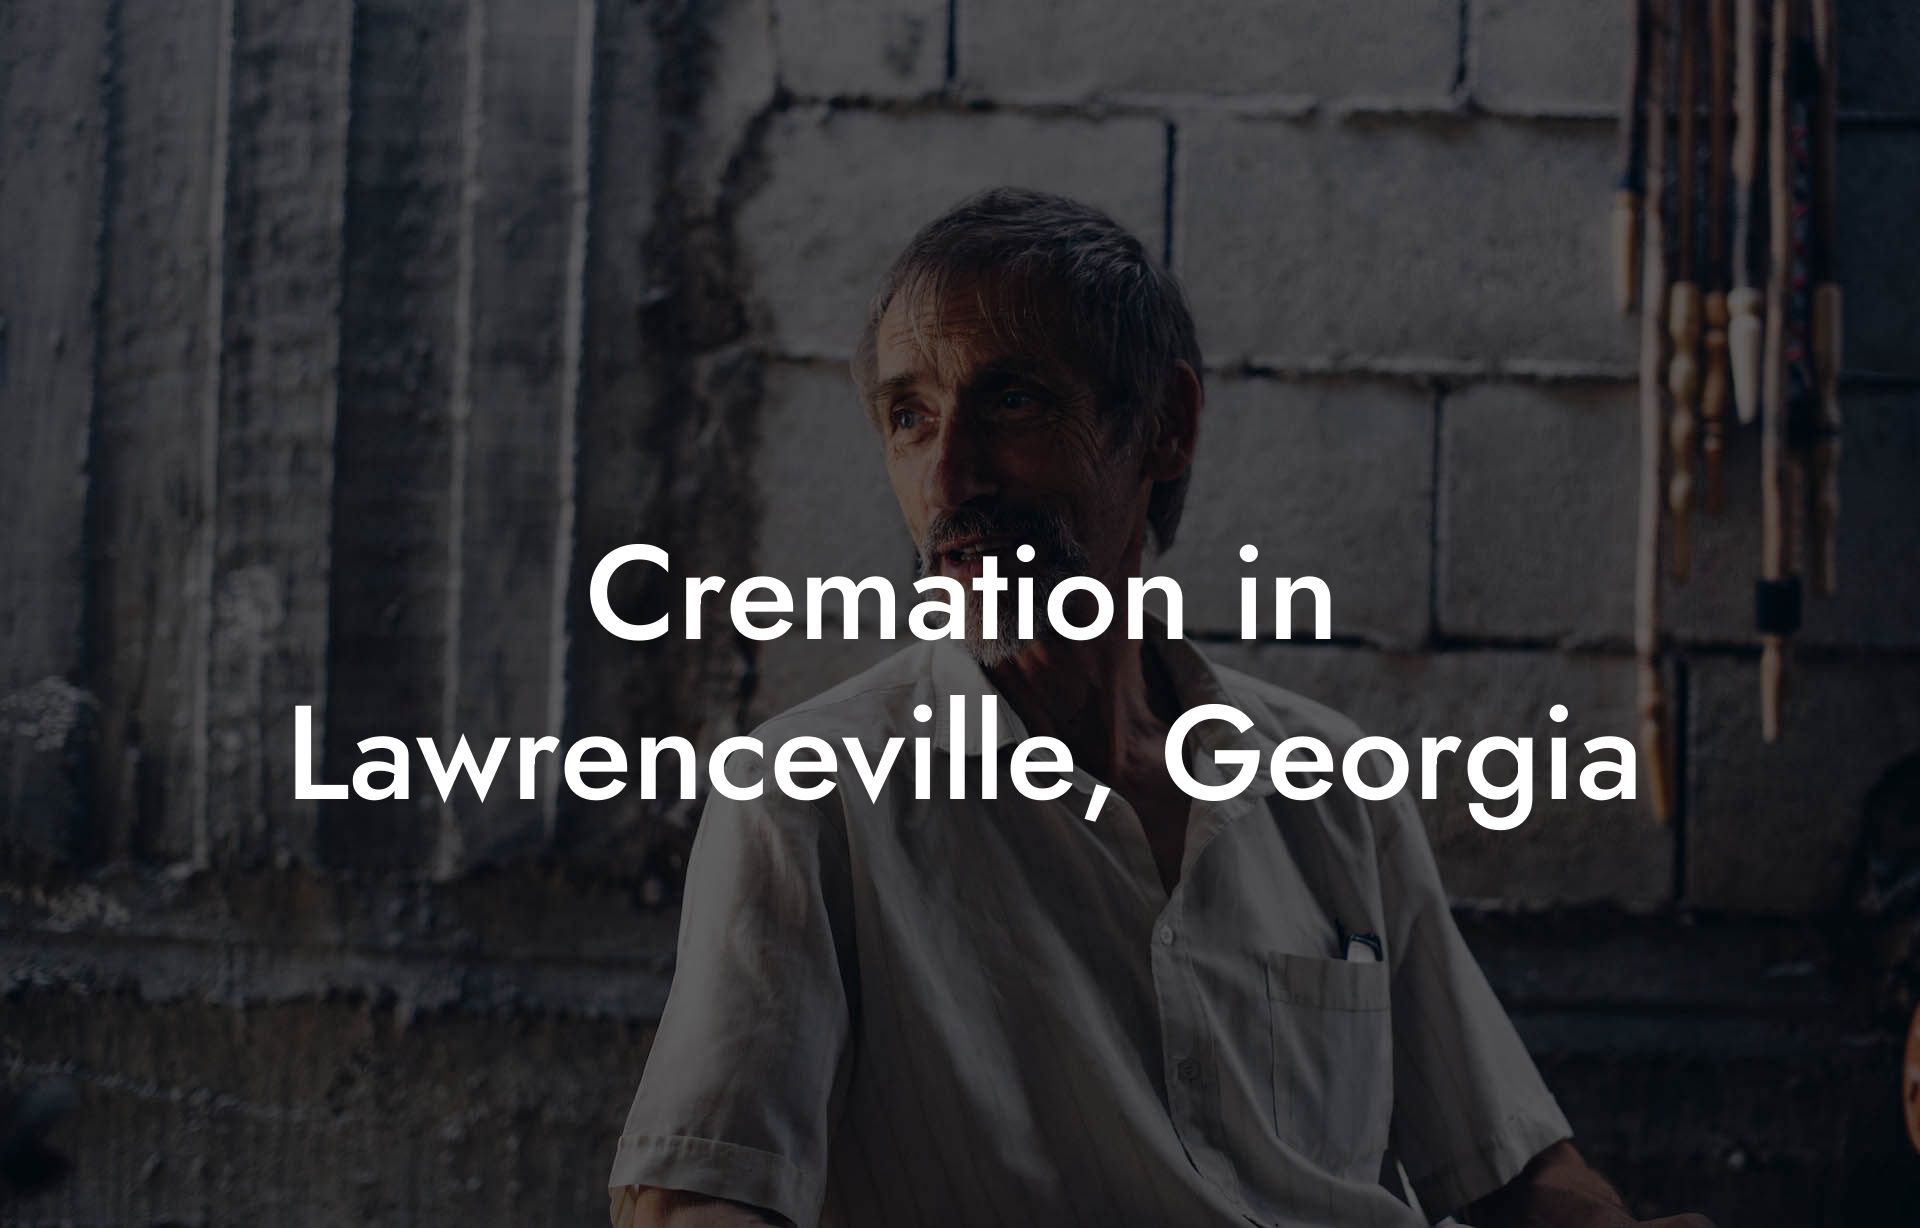 Cremation in Lawrenceville, Georgia